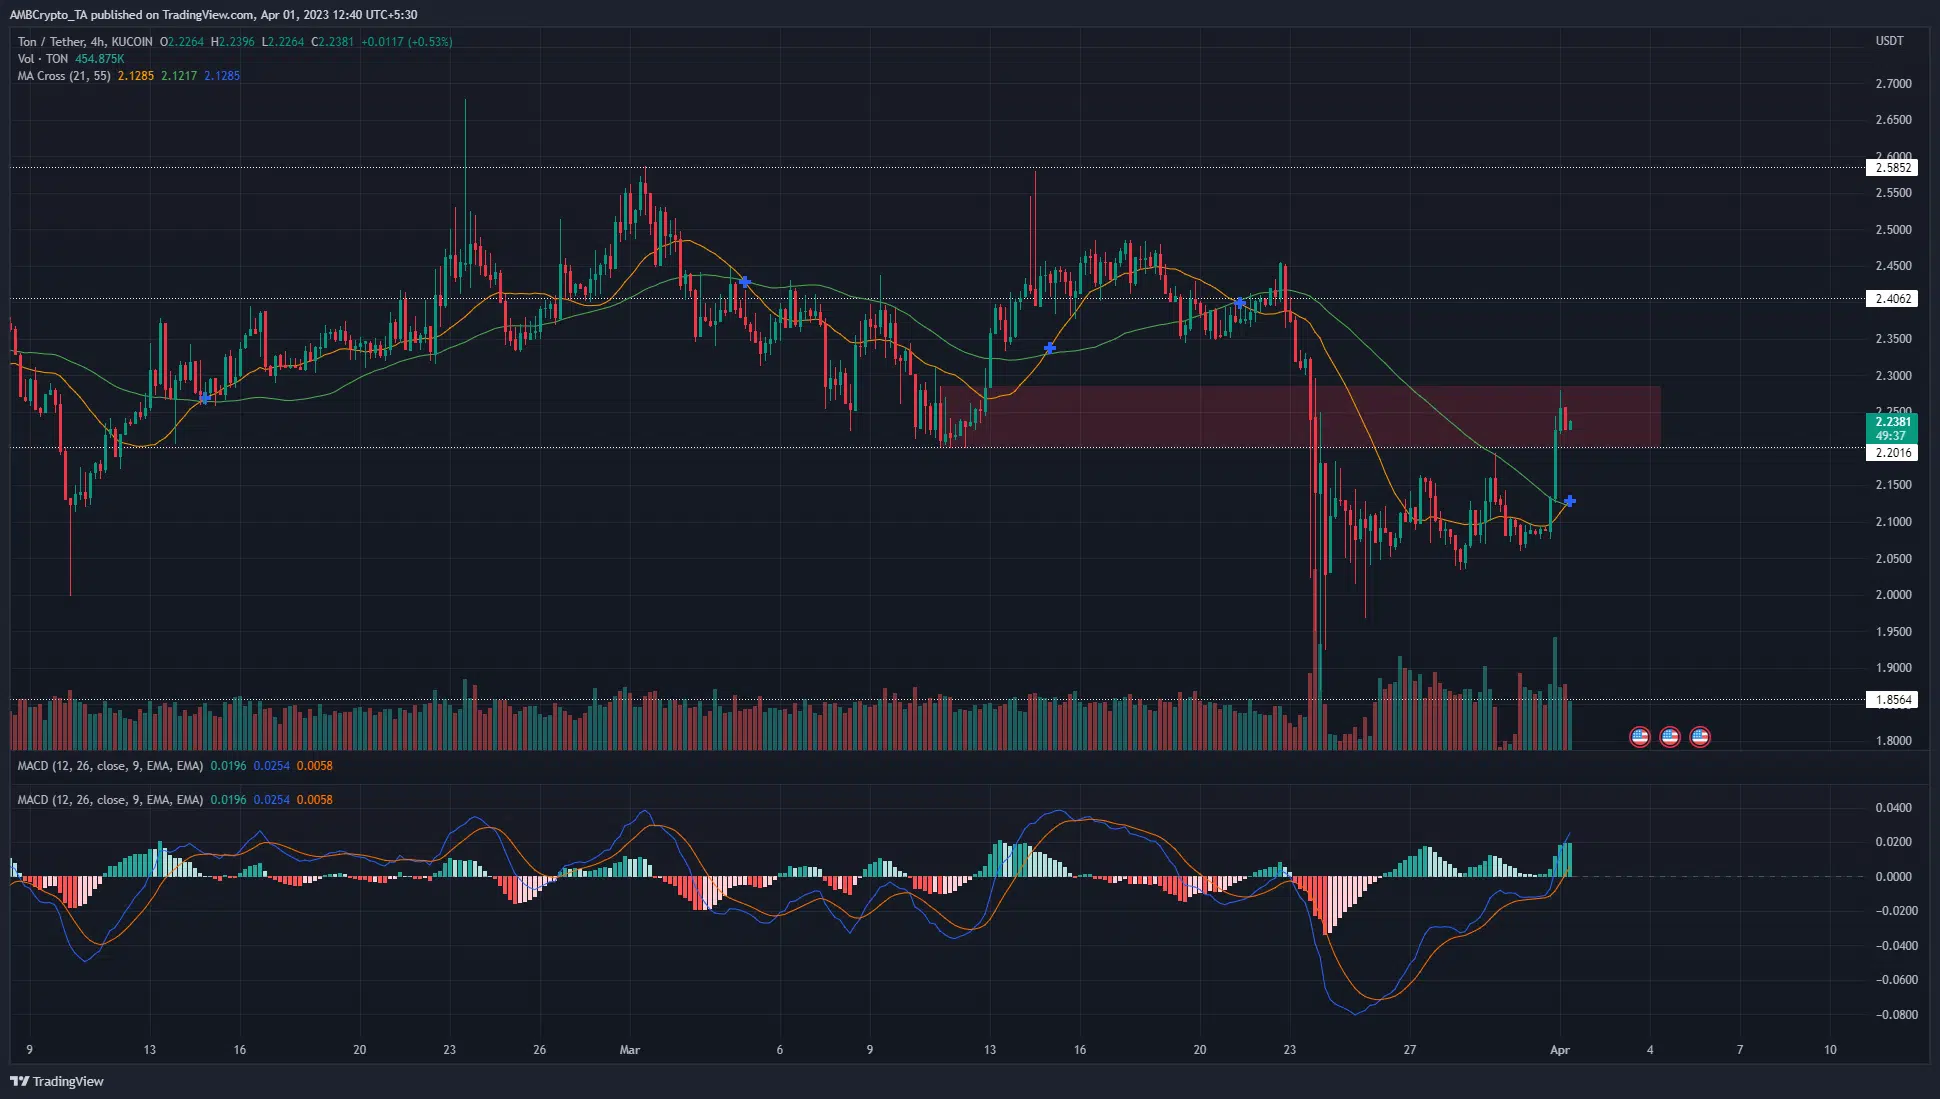 Toncoin climbs into a resistance zone but momentum favored the bulls